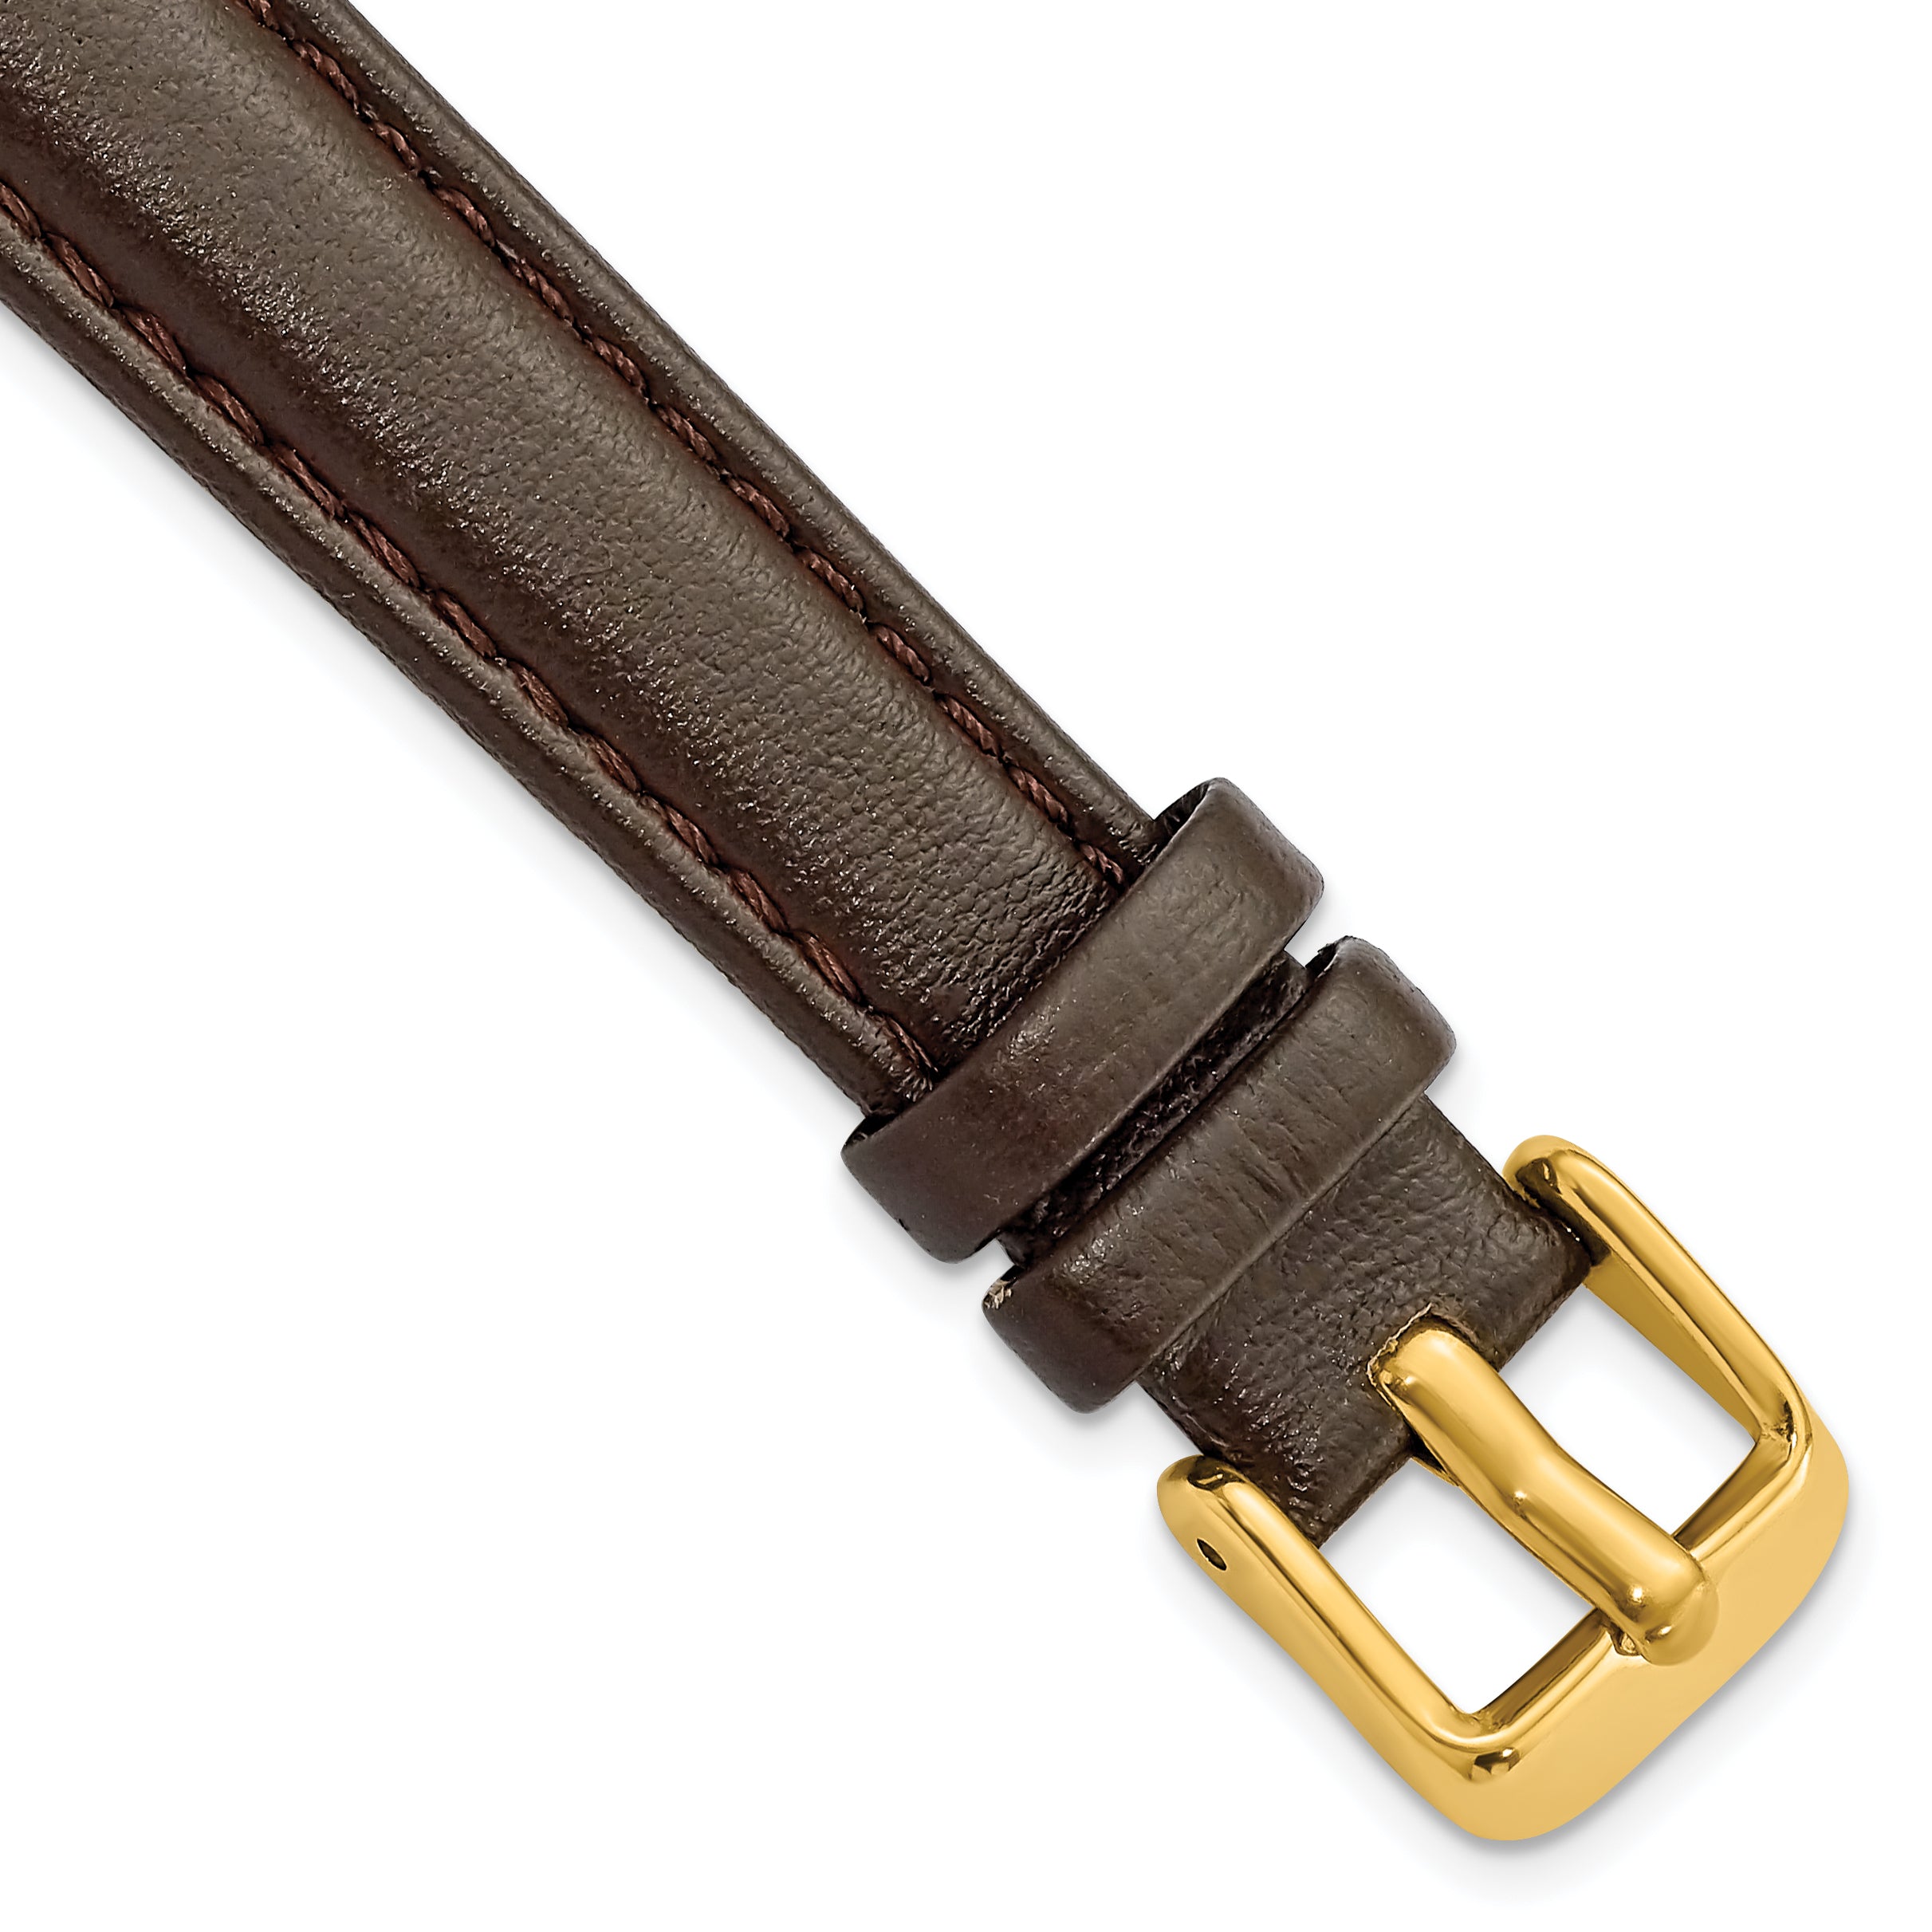 DeBeer 14mm Dark Brown Glove Leather with Gold-tone Panerai Style Buckle 6.75 inch Watch Band